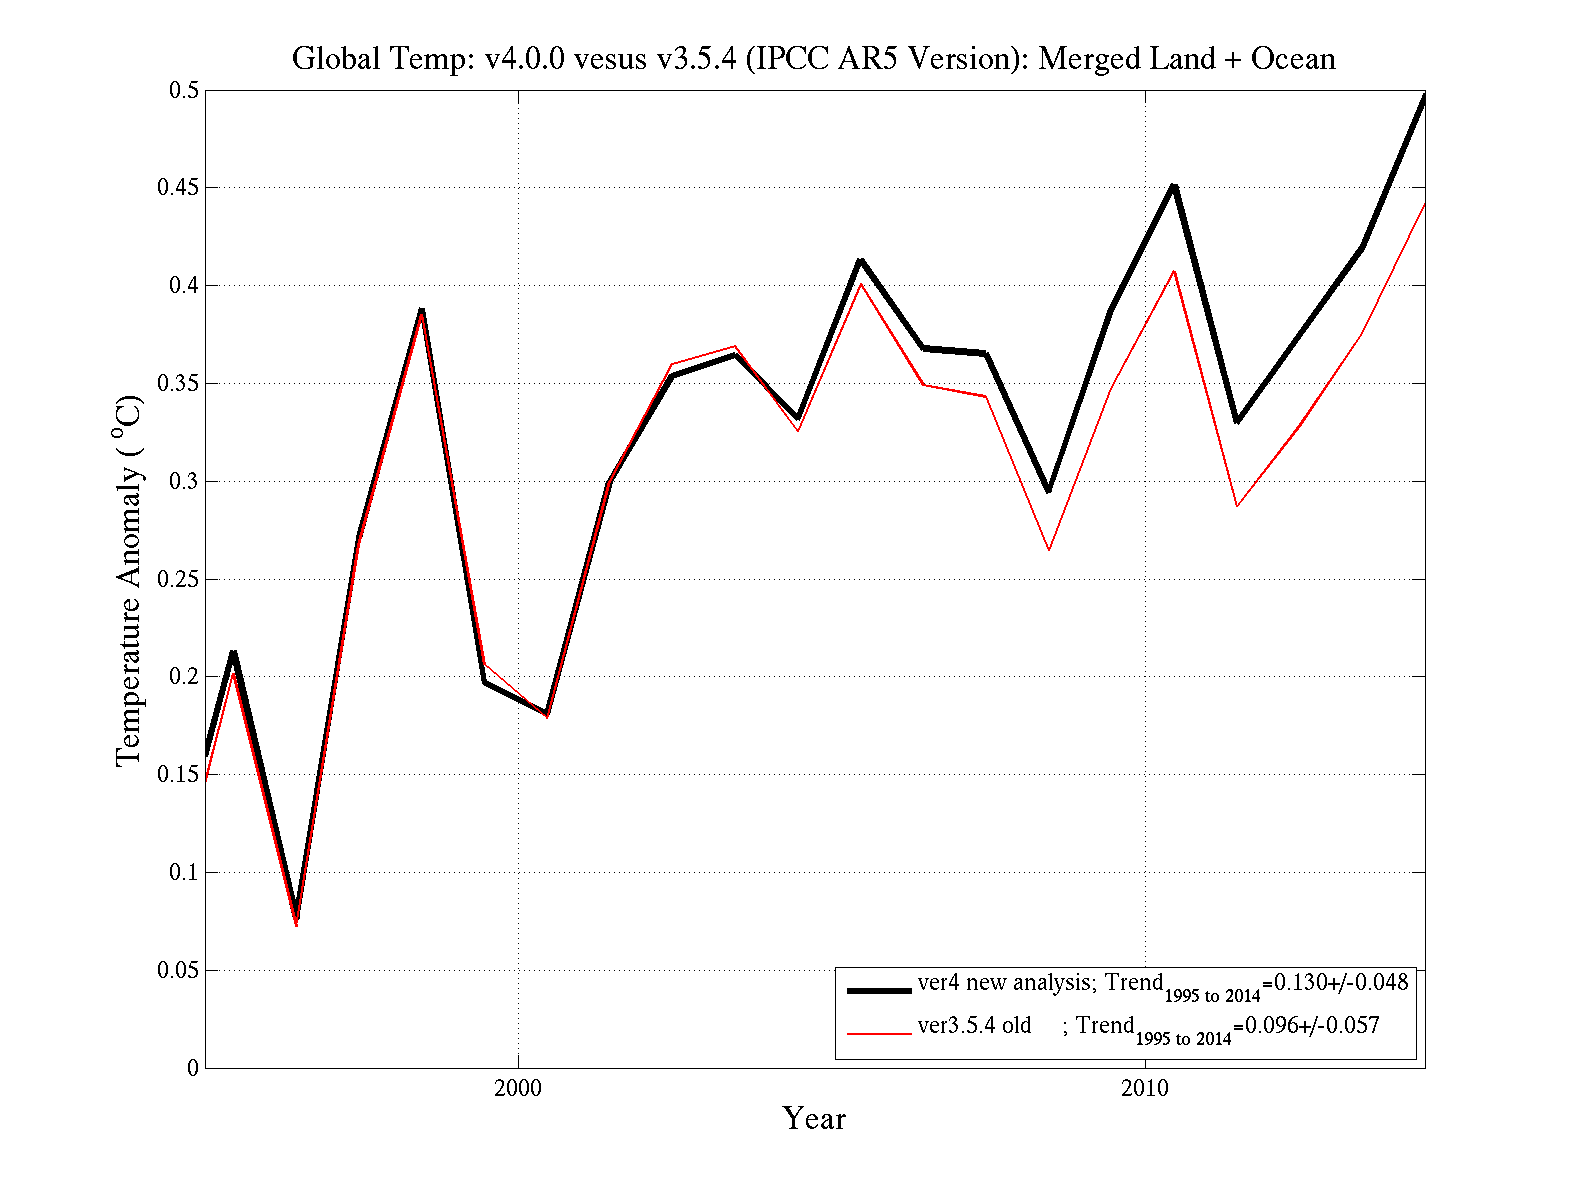 Annual Mean Anomaly Time Series and Trends for 1995-2014: Version 4.0.0 versus Version 3.5.4